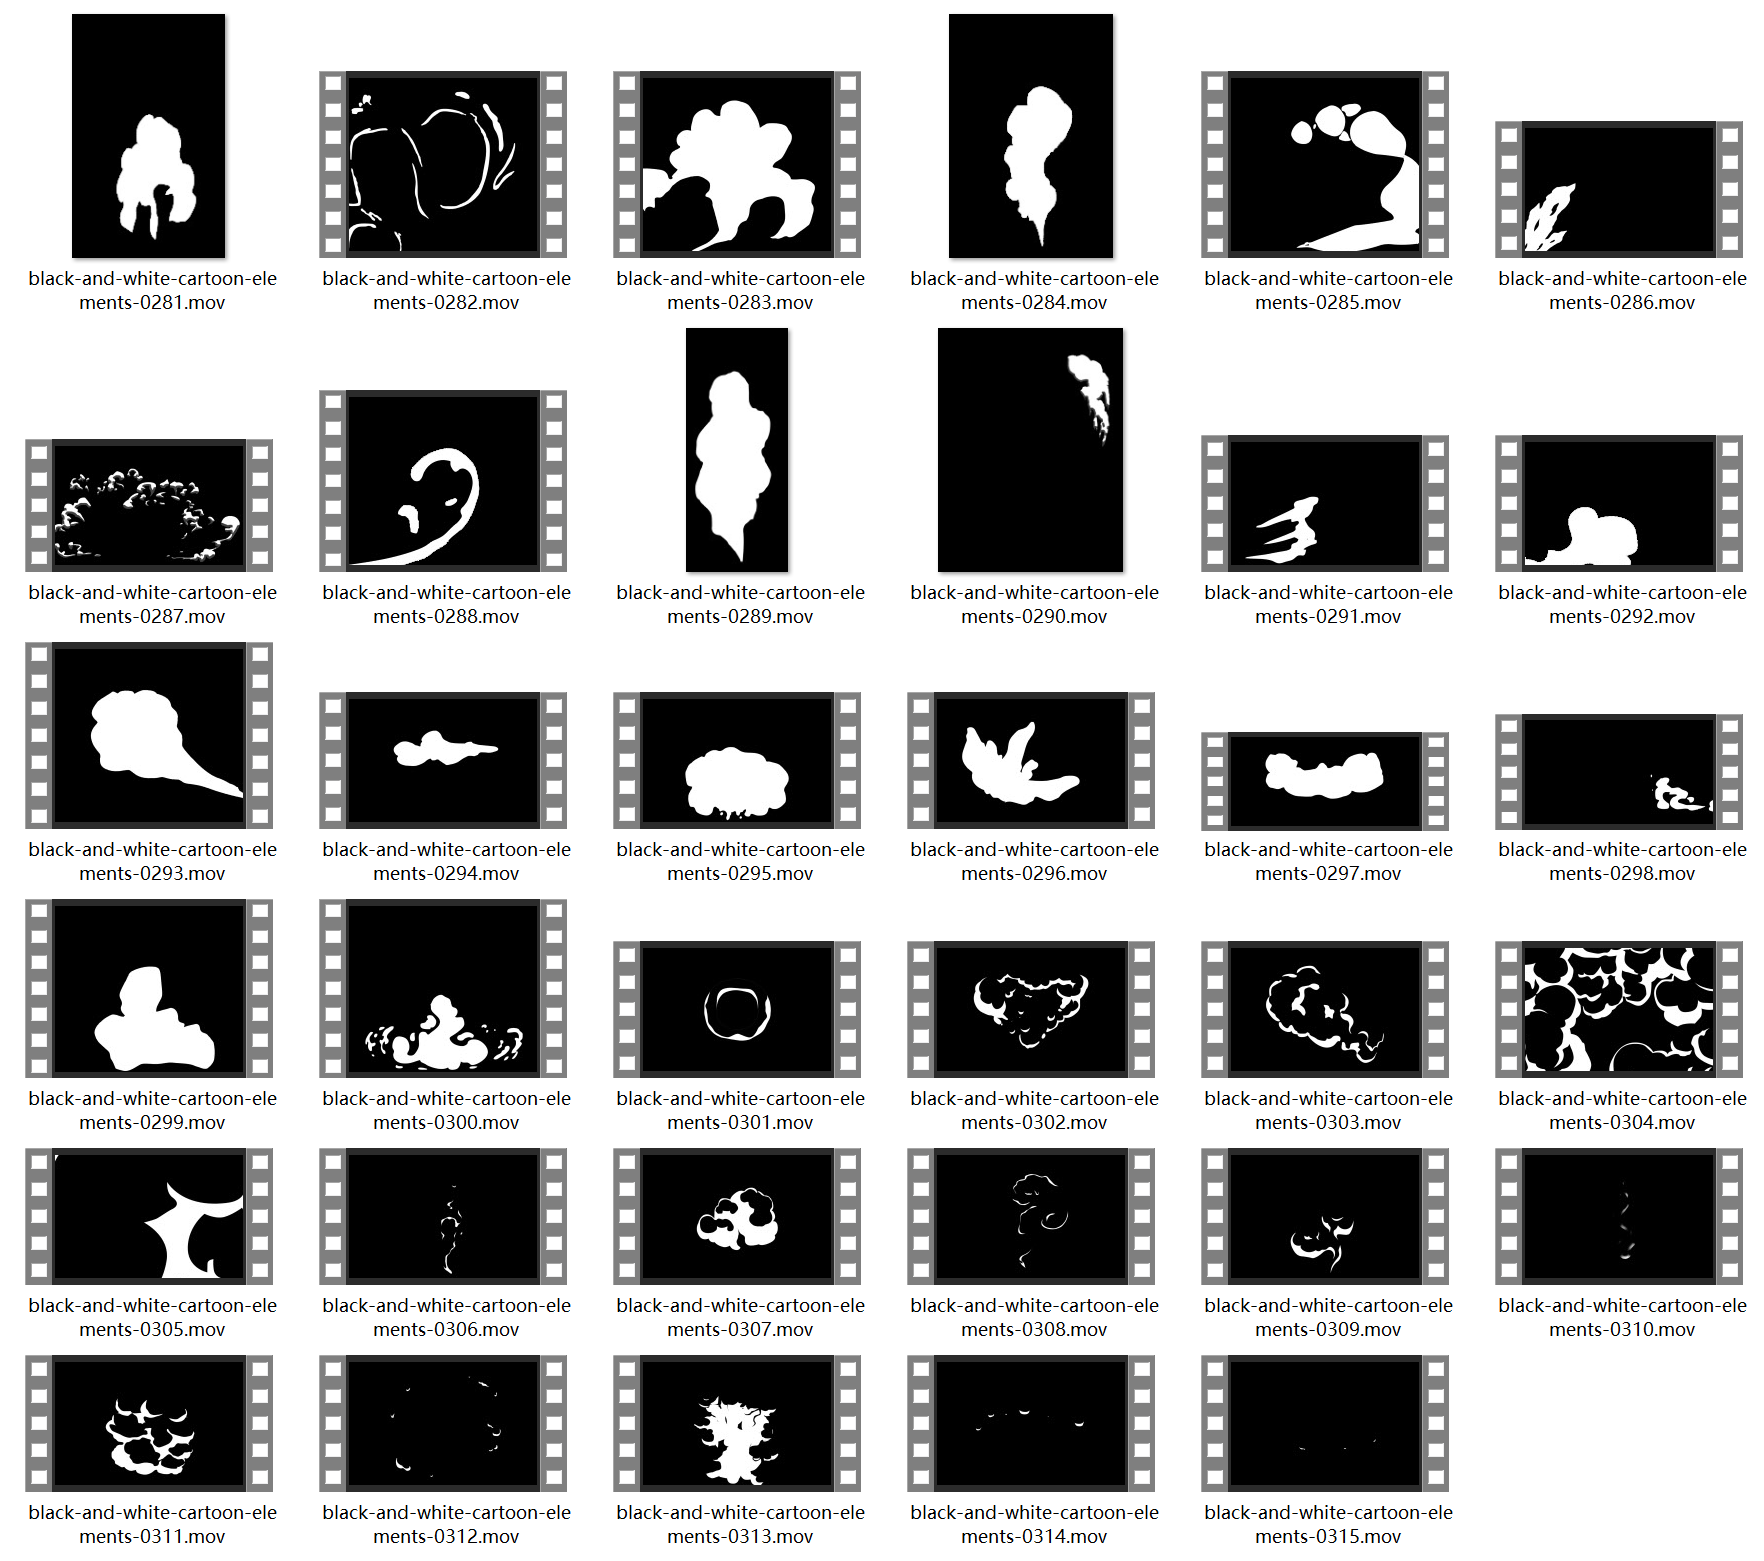 black and white cartoon elements-s0220009a1